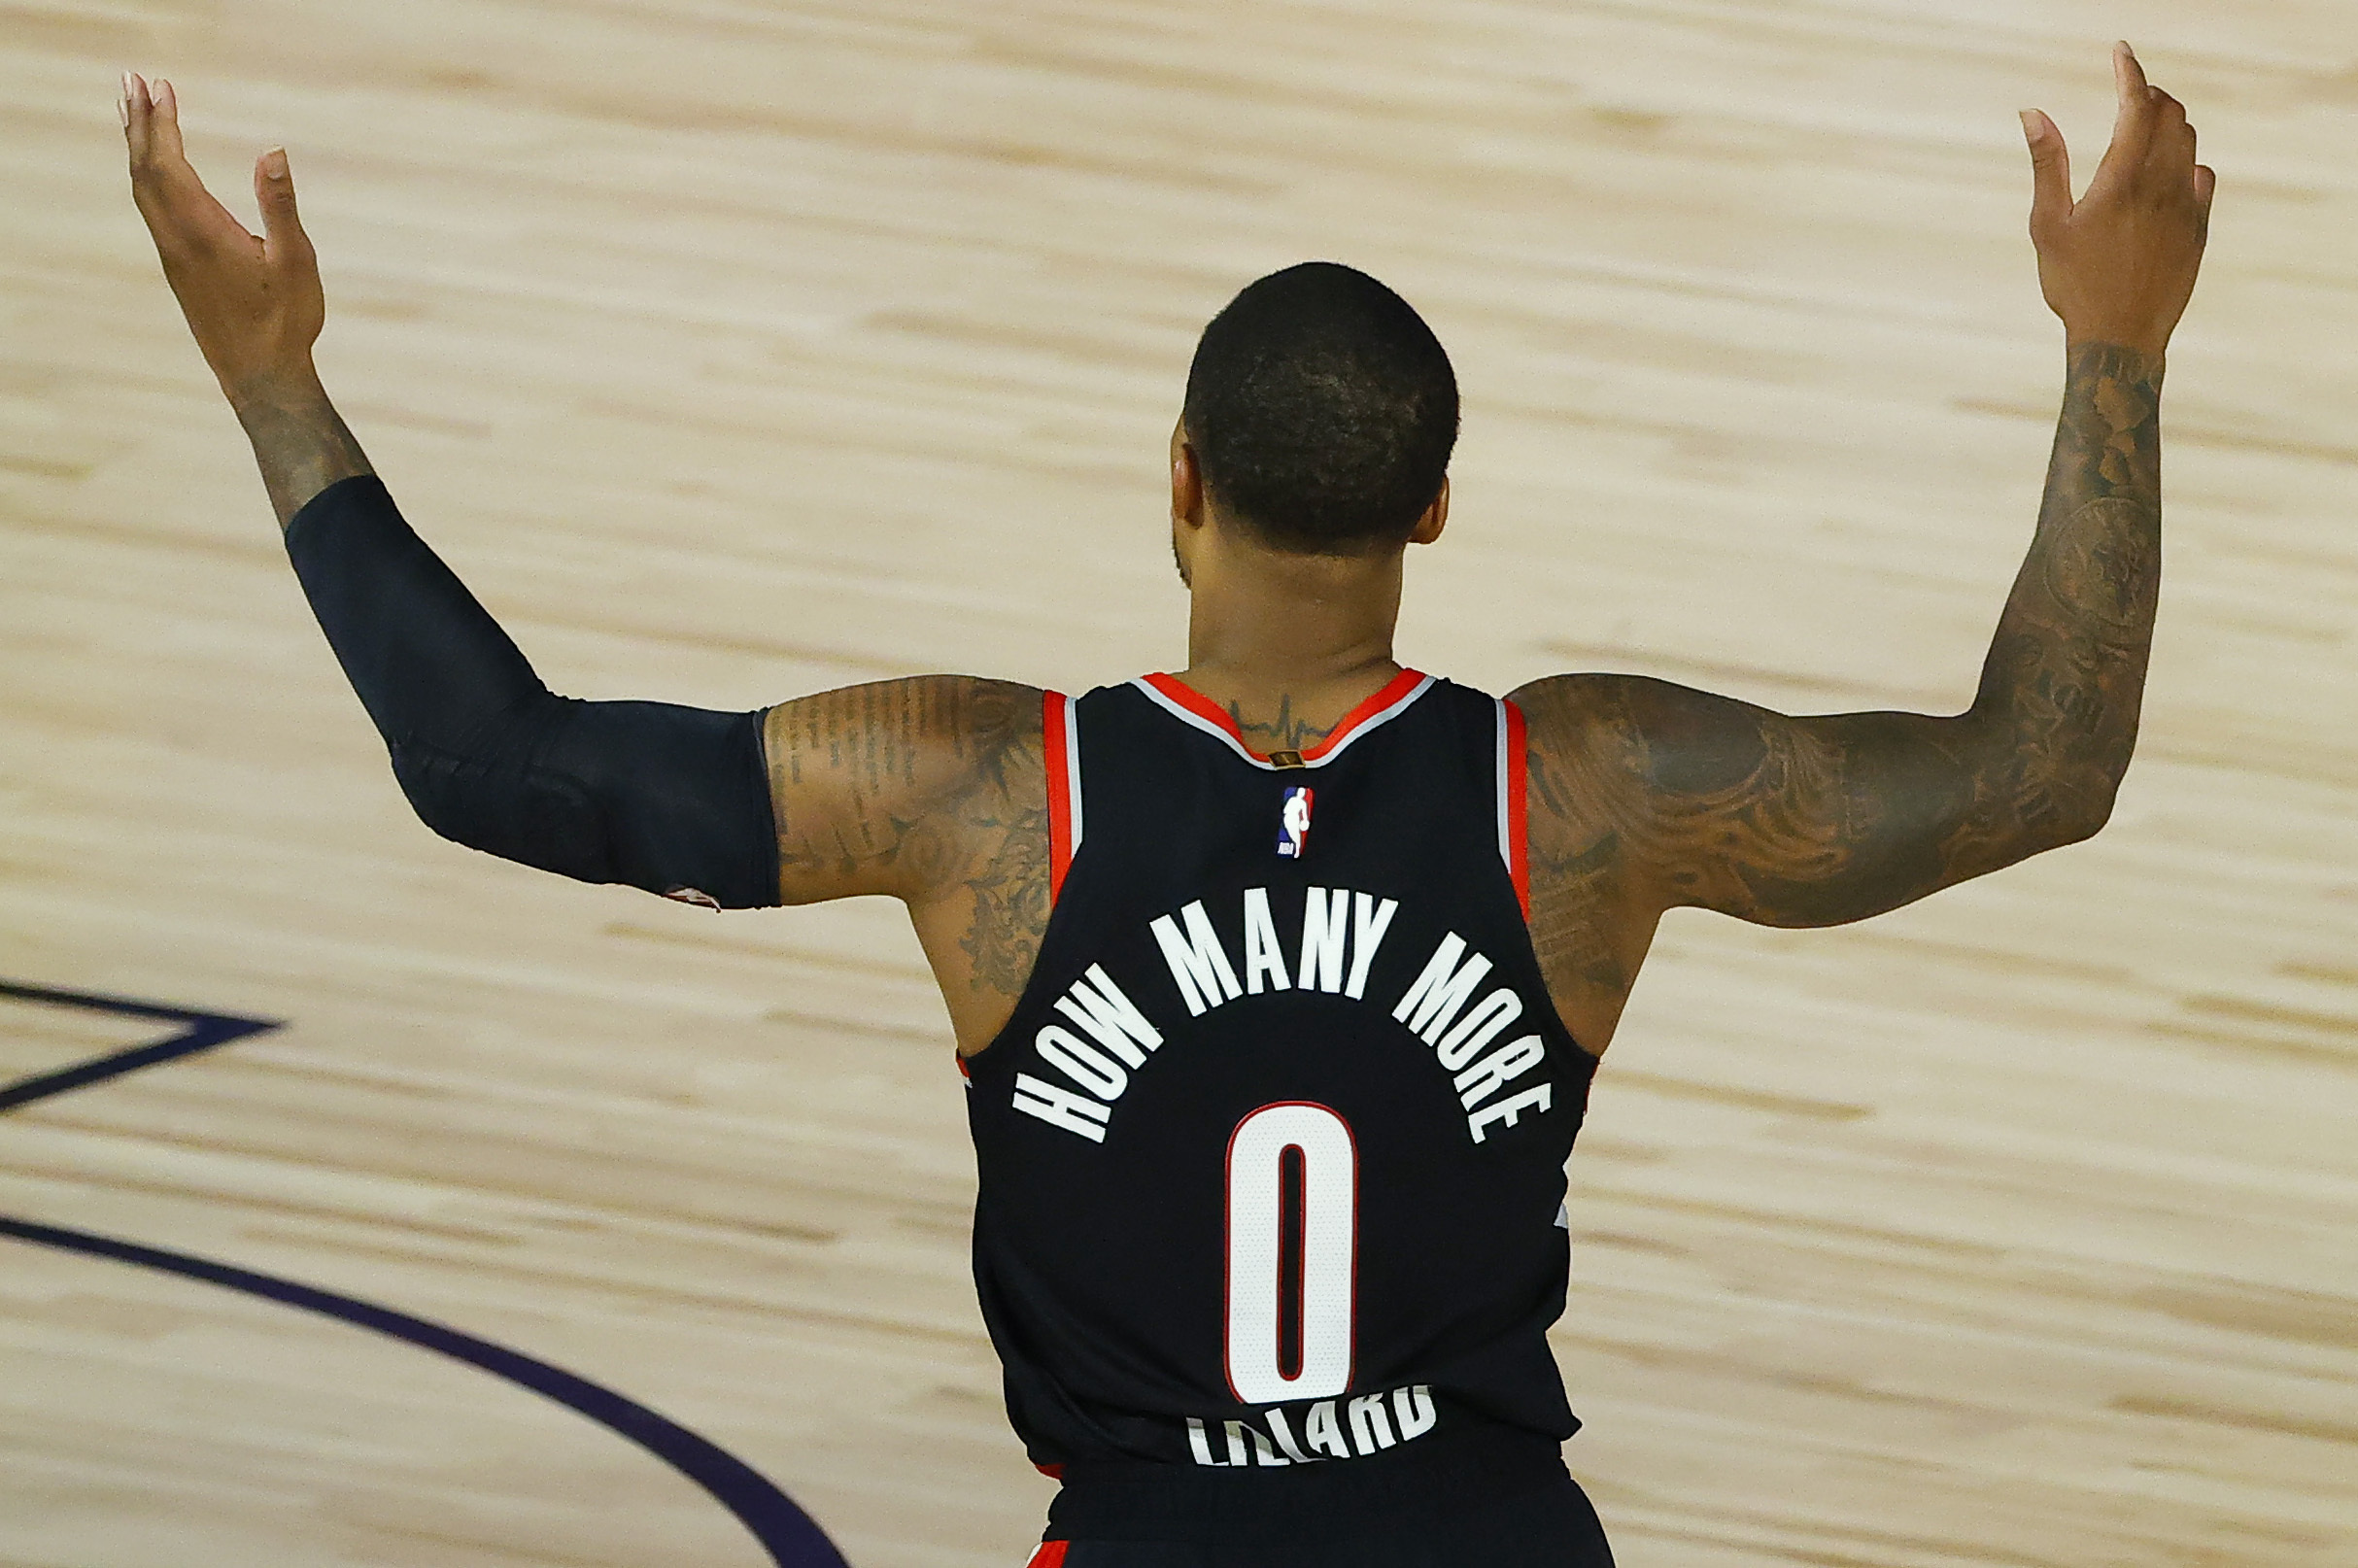 Damian Lillard: 'I Don't Have a Fearful Mentality' Ahead of Game 2